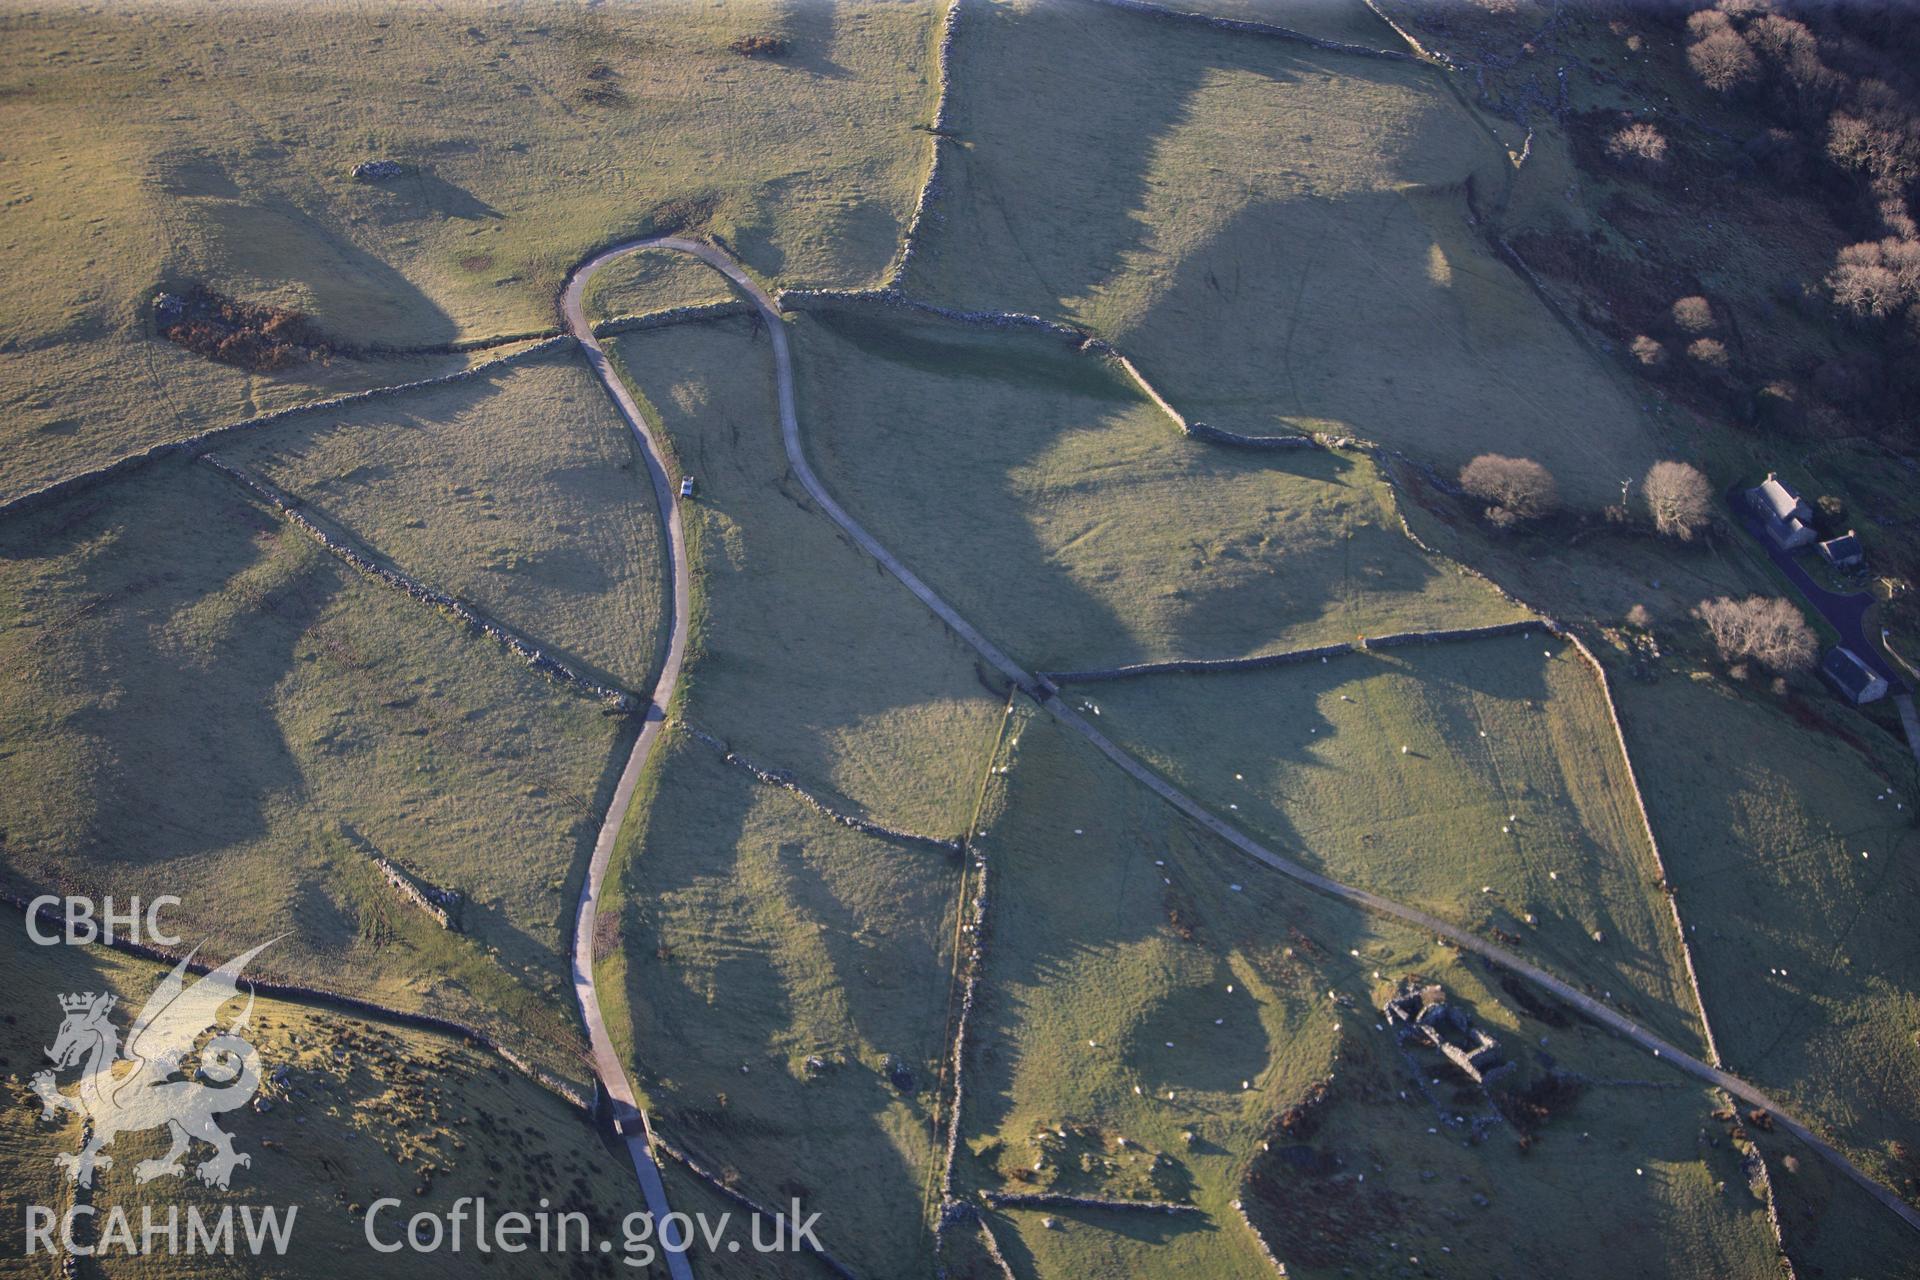 RCAHMW colour oblique photograph of Erw Wen, circular hut circle and field system. Taken by Toby Driver on 10/12/2012.